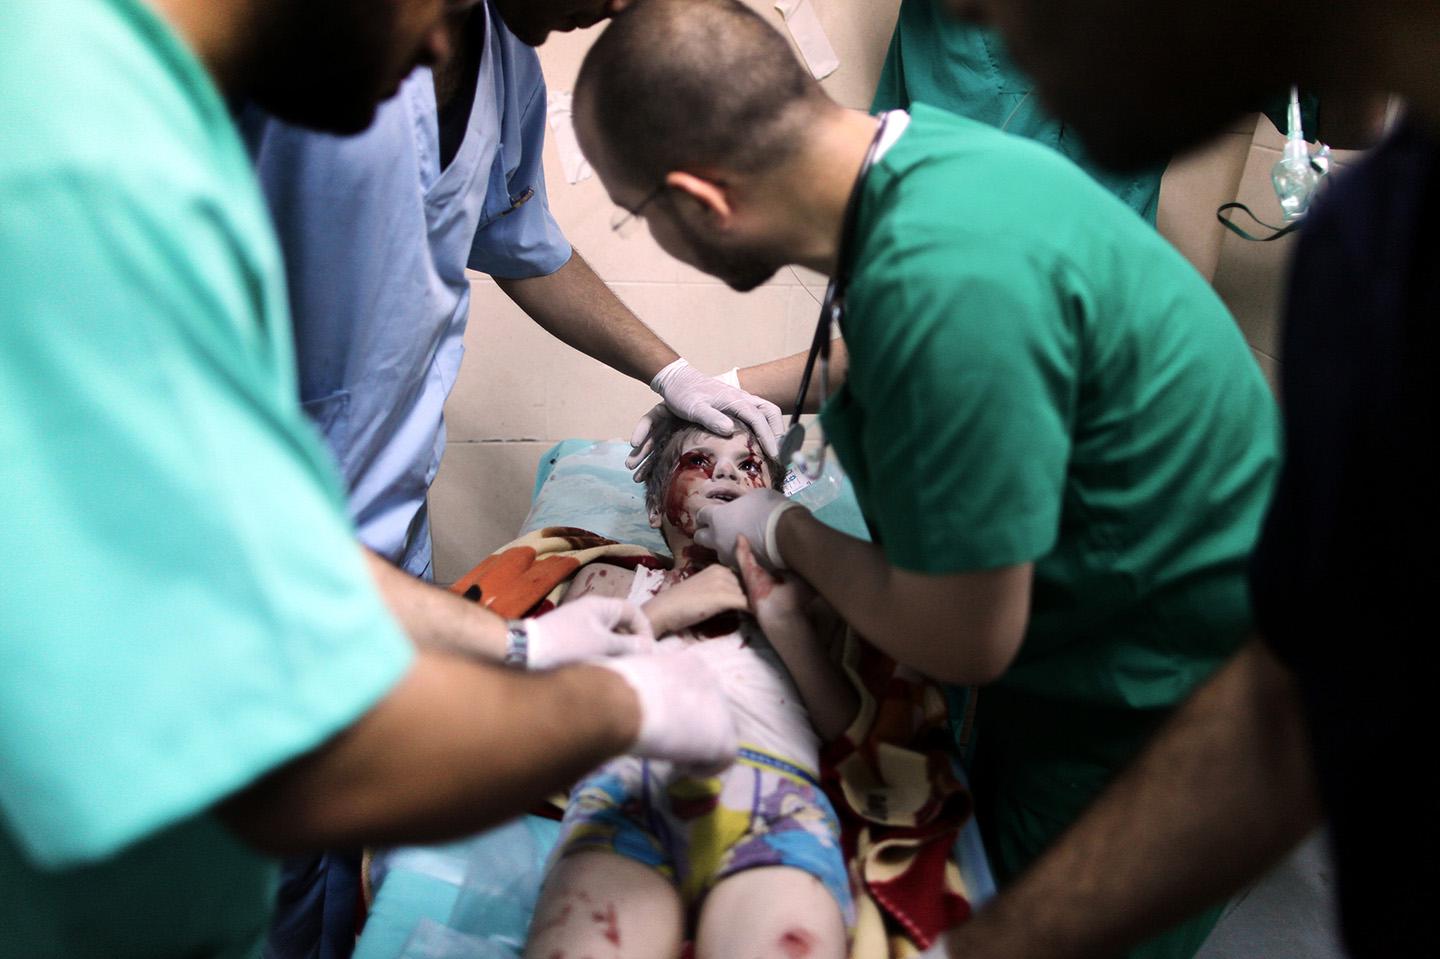 Doctors treat a Palestinian kid, who was injured in an Israeli attack.